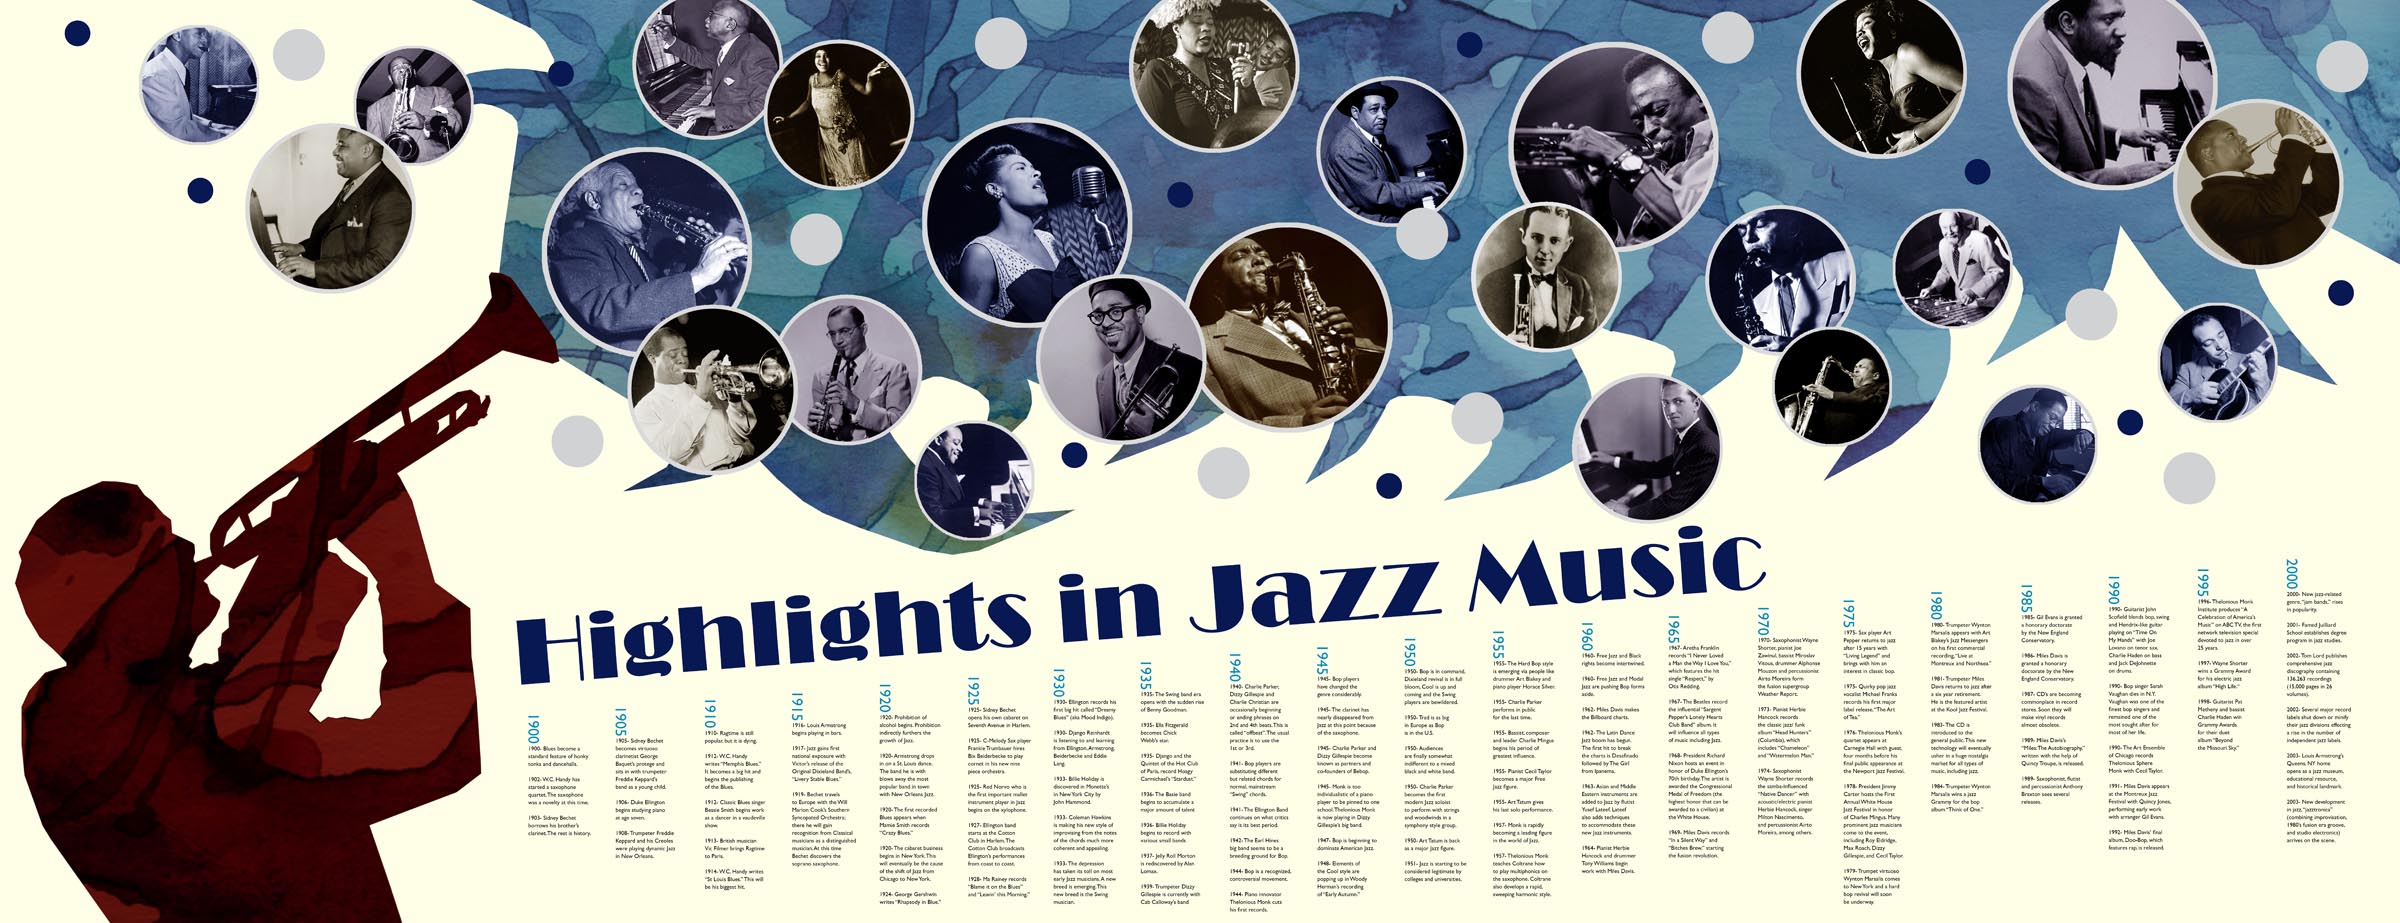 poster timeline jazz In Defense of the American Melting Pot